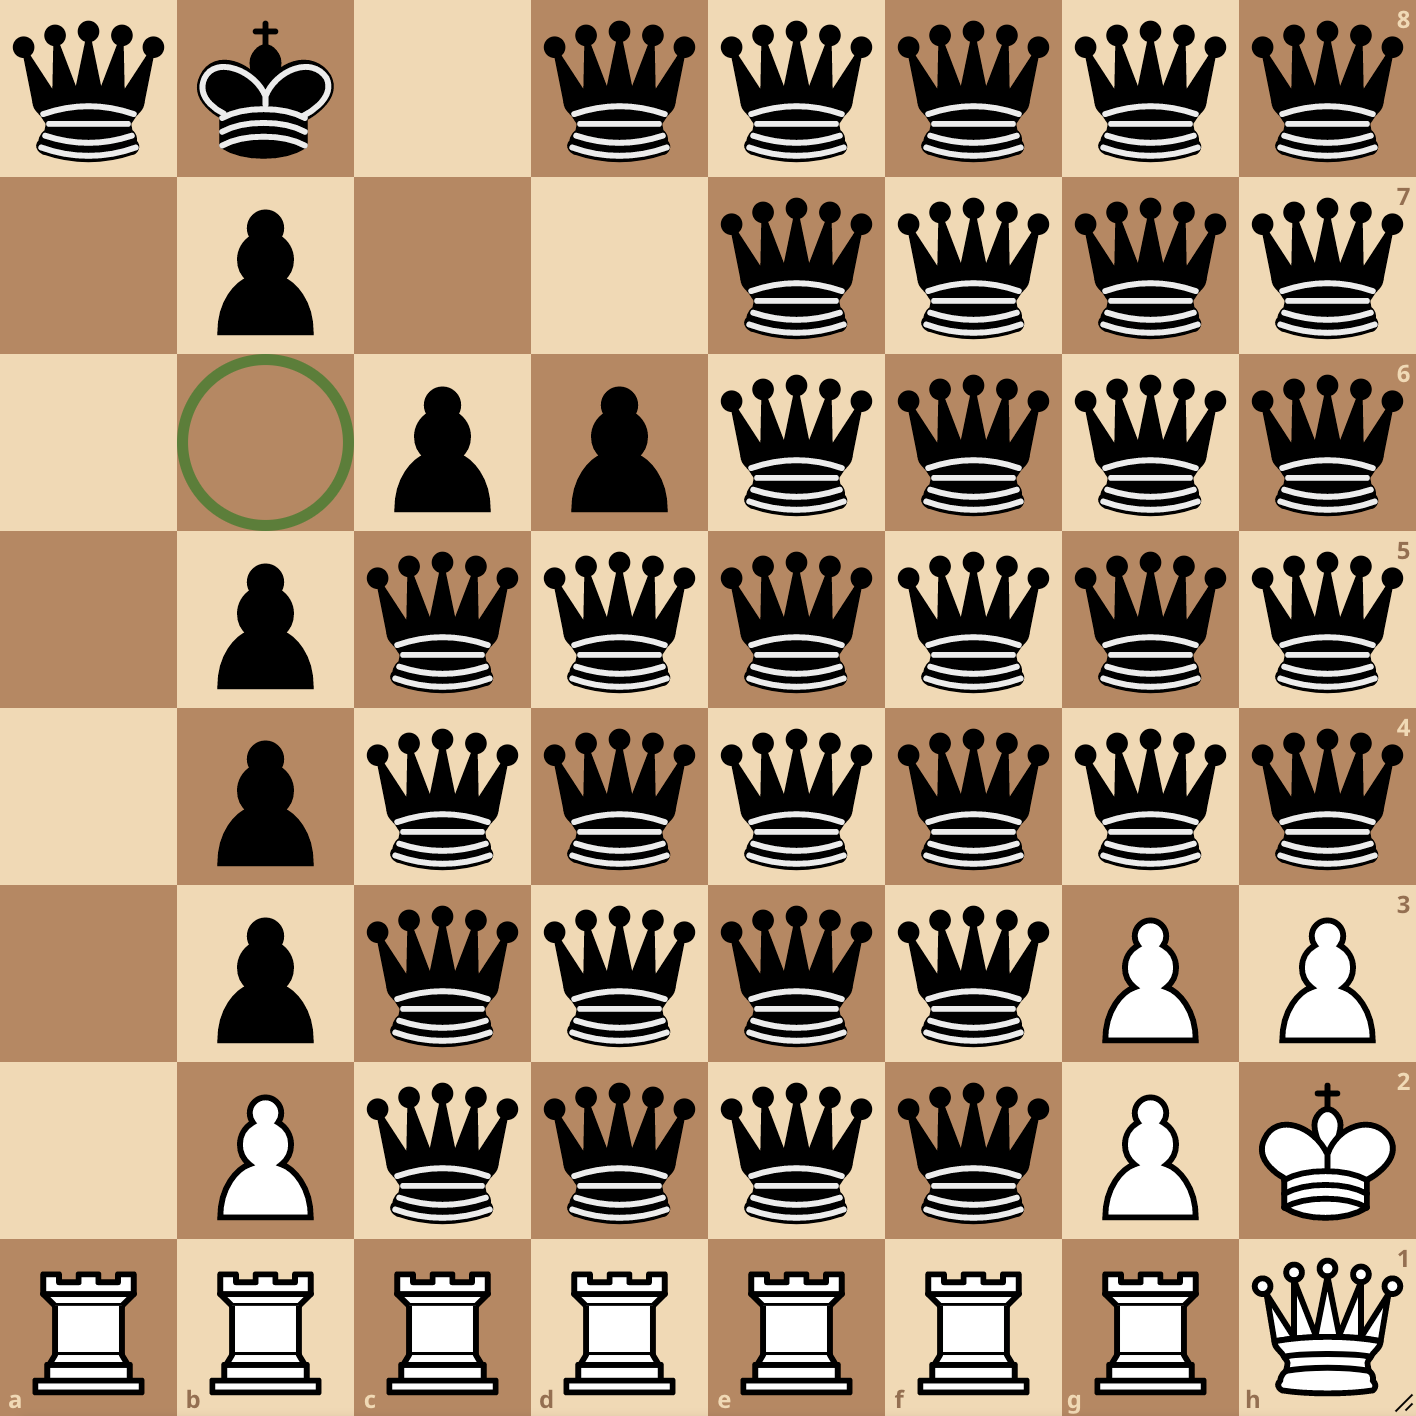 A chess board with a1 at the bottom left. A green circle marks b6. The board's FEN is below.